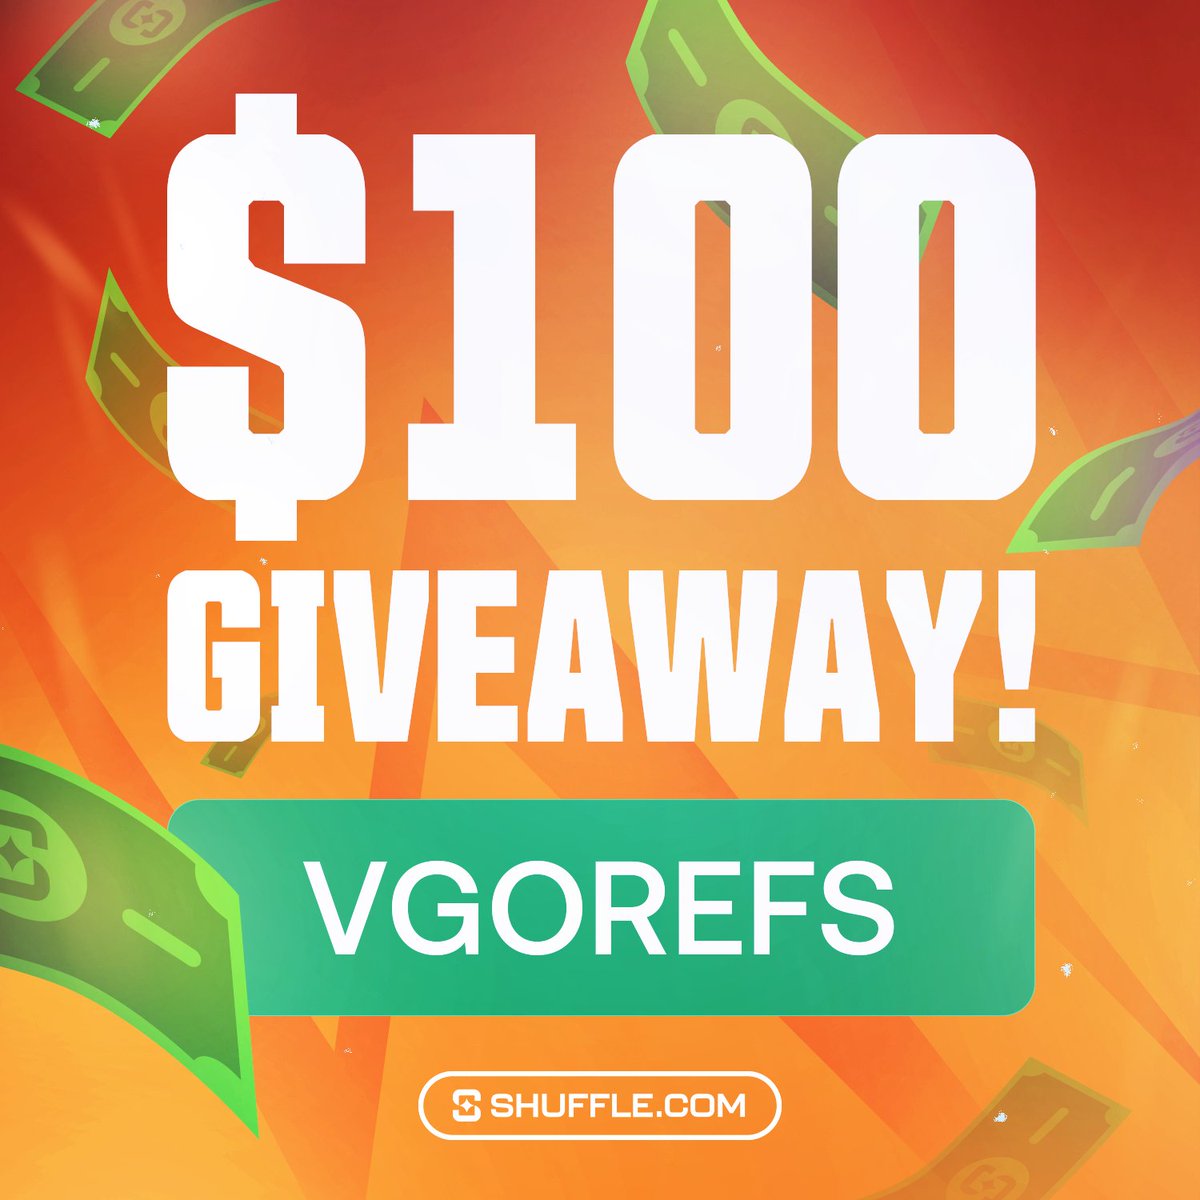 $100.00 GIVEAWAY! 🎉 To enter: ✅ Follow us & @Shufflecom ✅ Retweet + Like ✅ Sign up: Shuffle.com/?r=vgorefs (show proofs, comment your username) Winners in 48 hours, Best of luck! 🍀